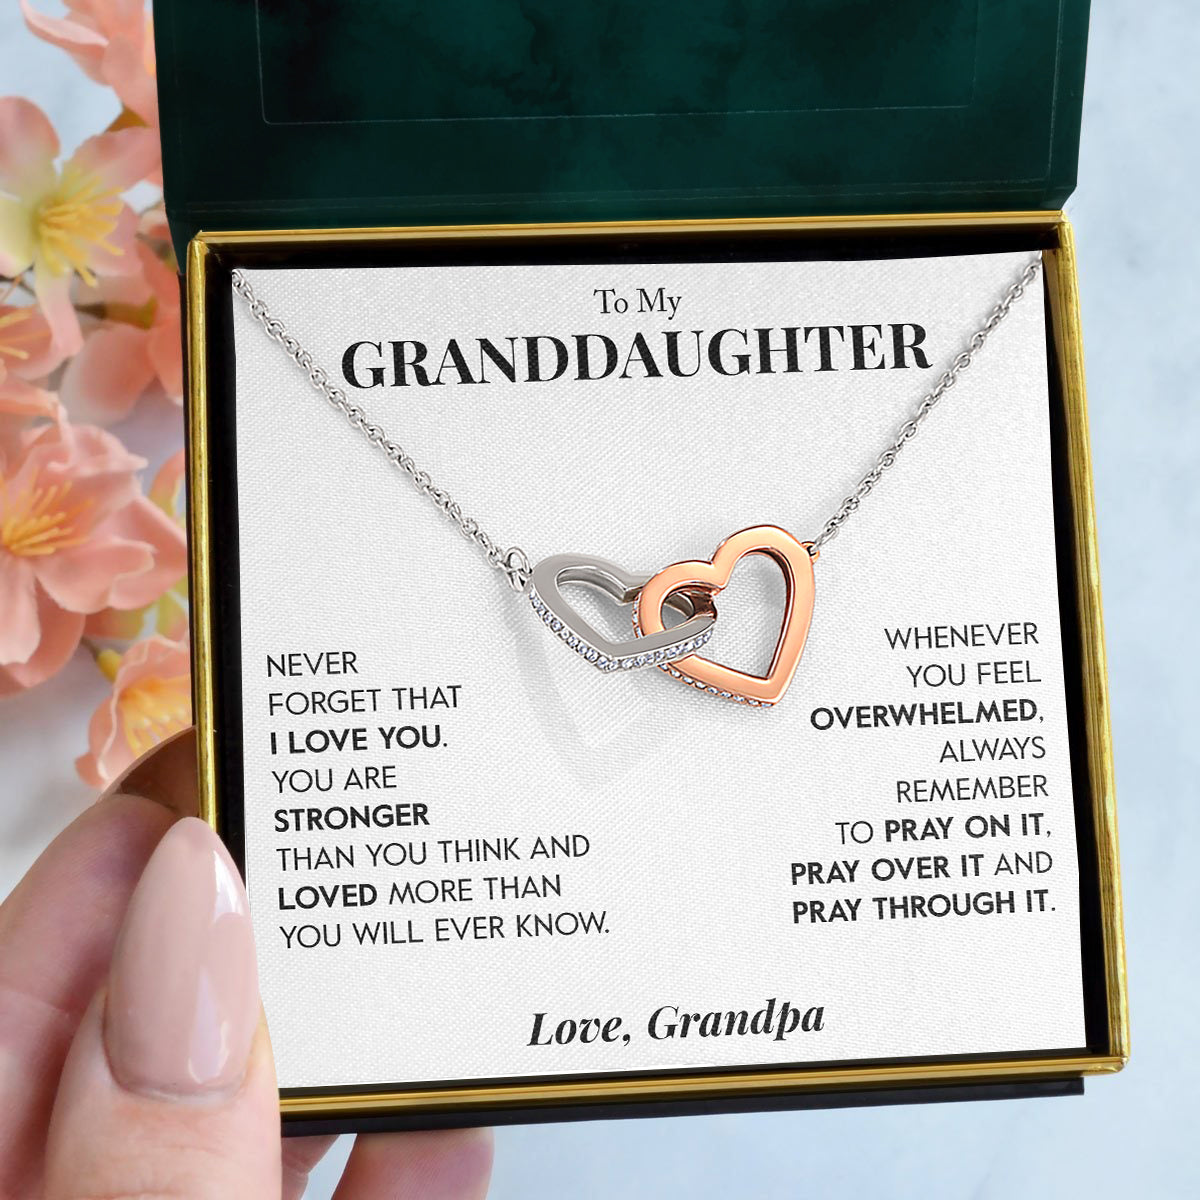 To My Granddaughter | "Pray On It" | Interlocking Hearts Necklace